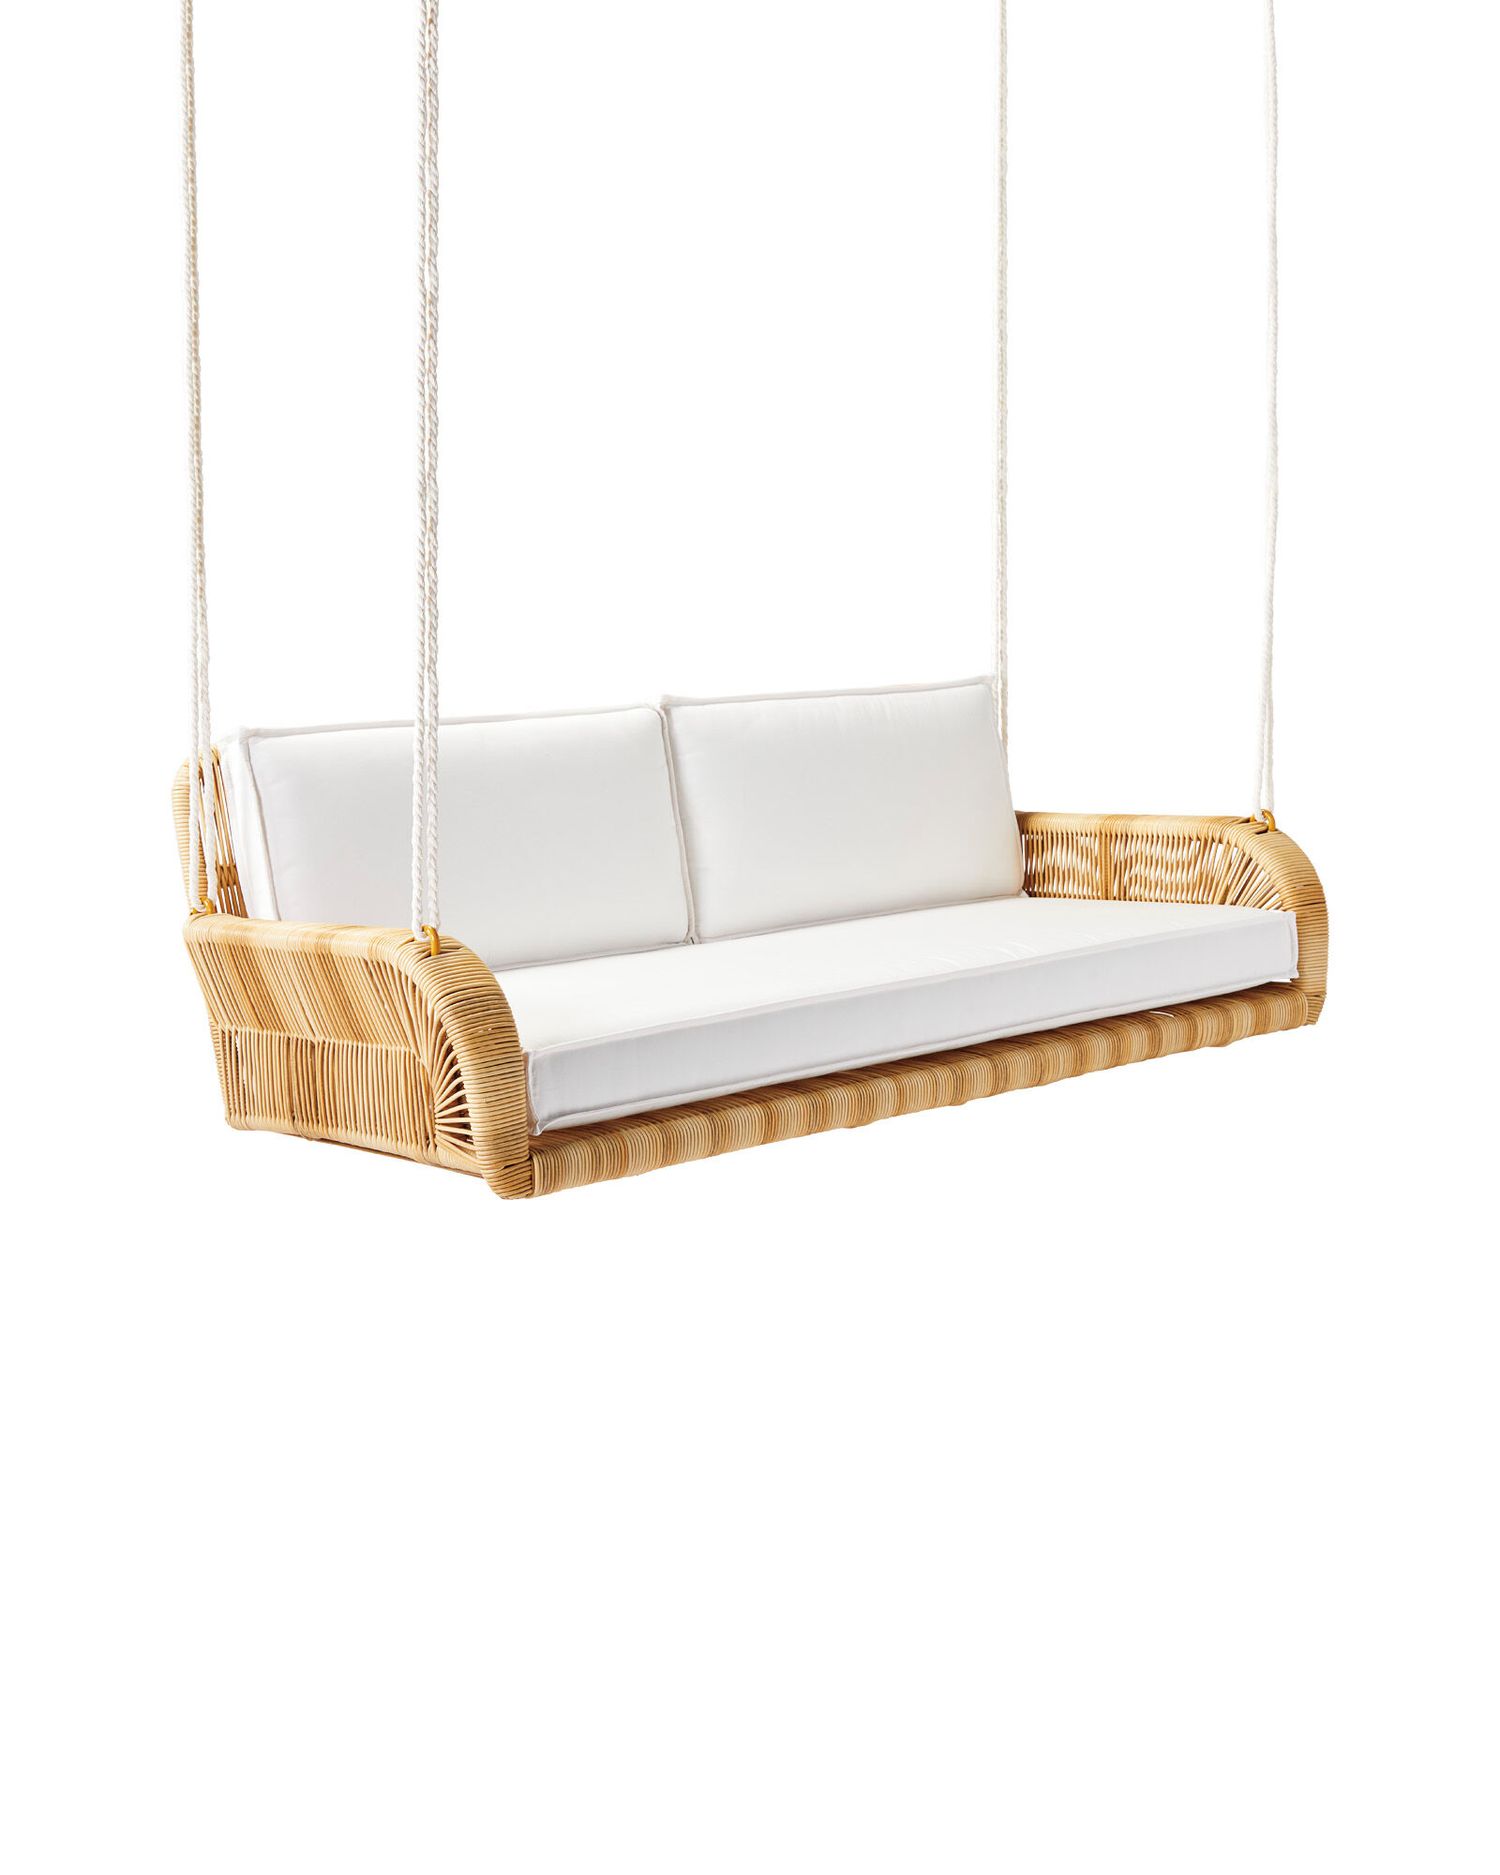 Shop Springwood Hanging Daybed from Serena & Lily on Openhaus